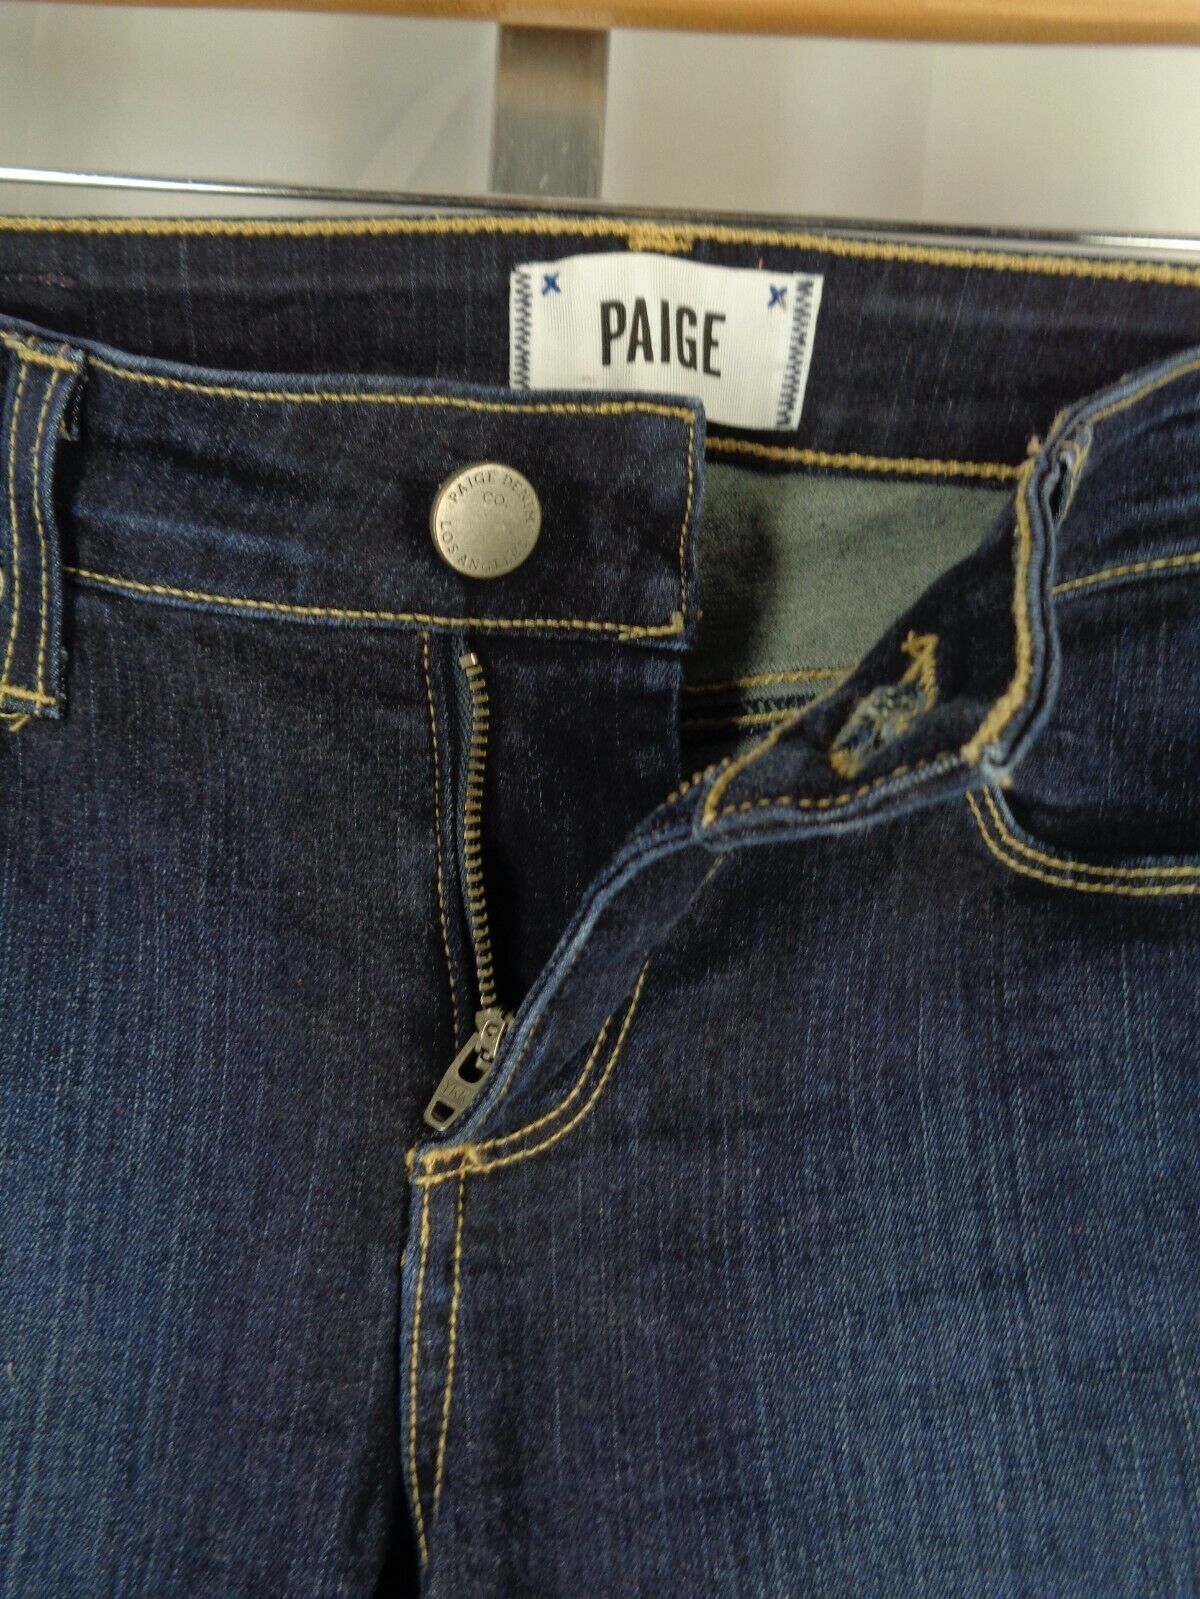 Paige Skyline Skinny Jeans Tag Size 26 Actual 28.5 - image 7